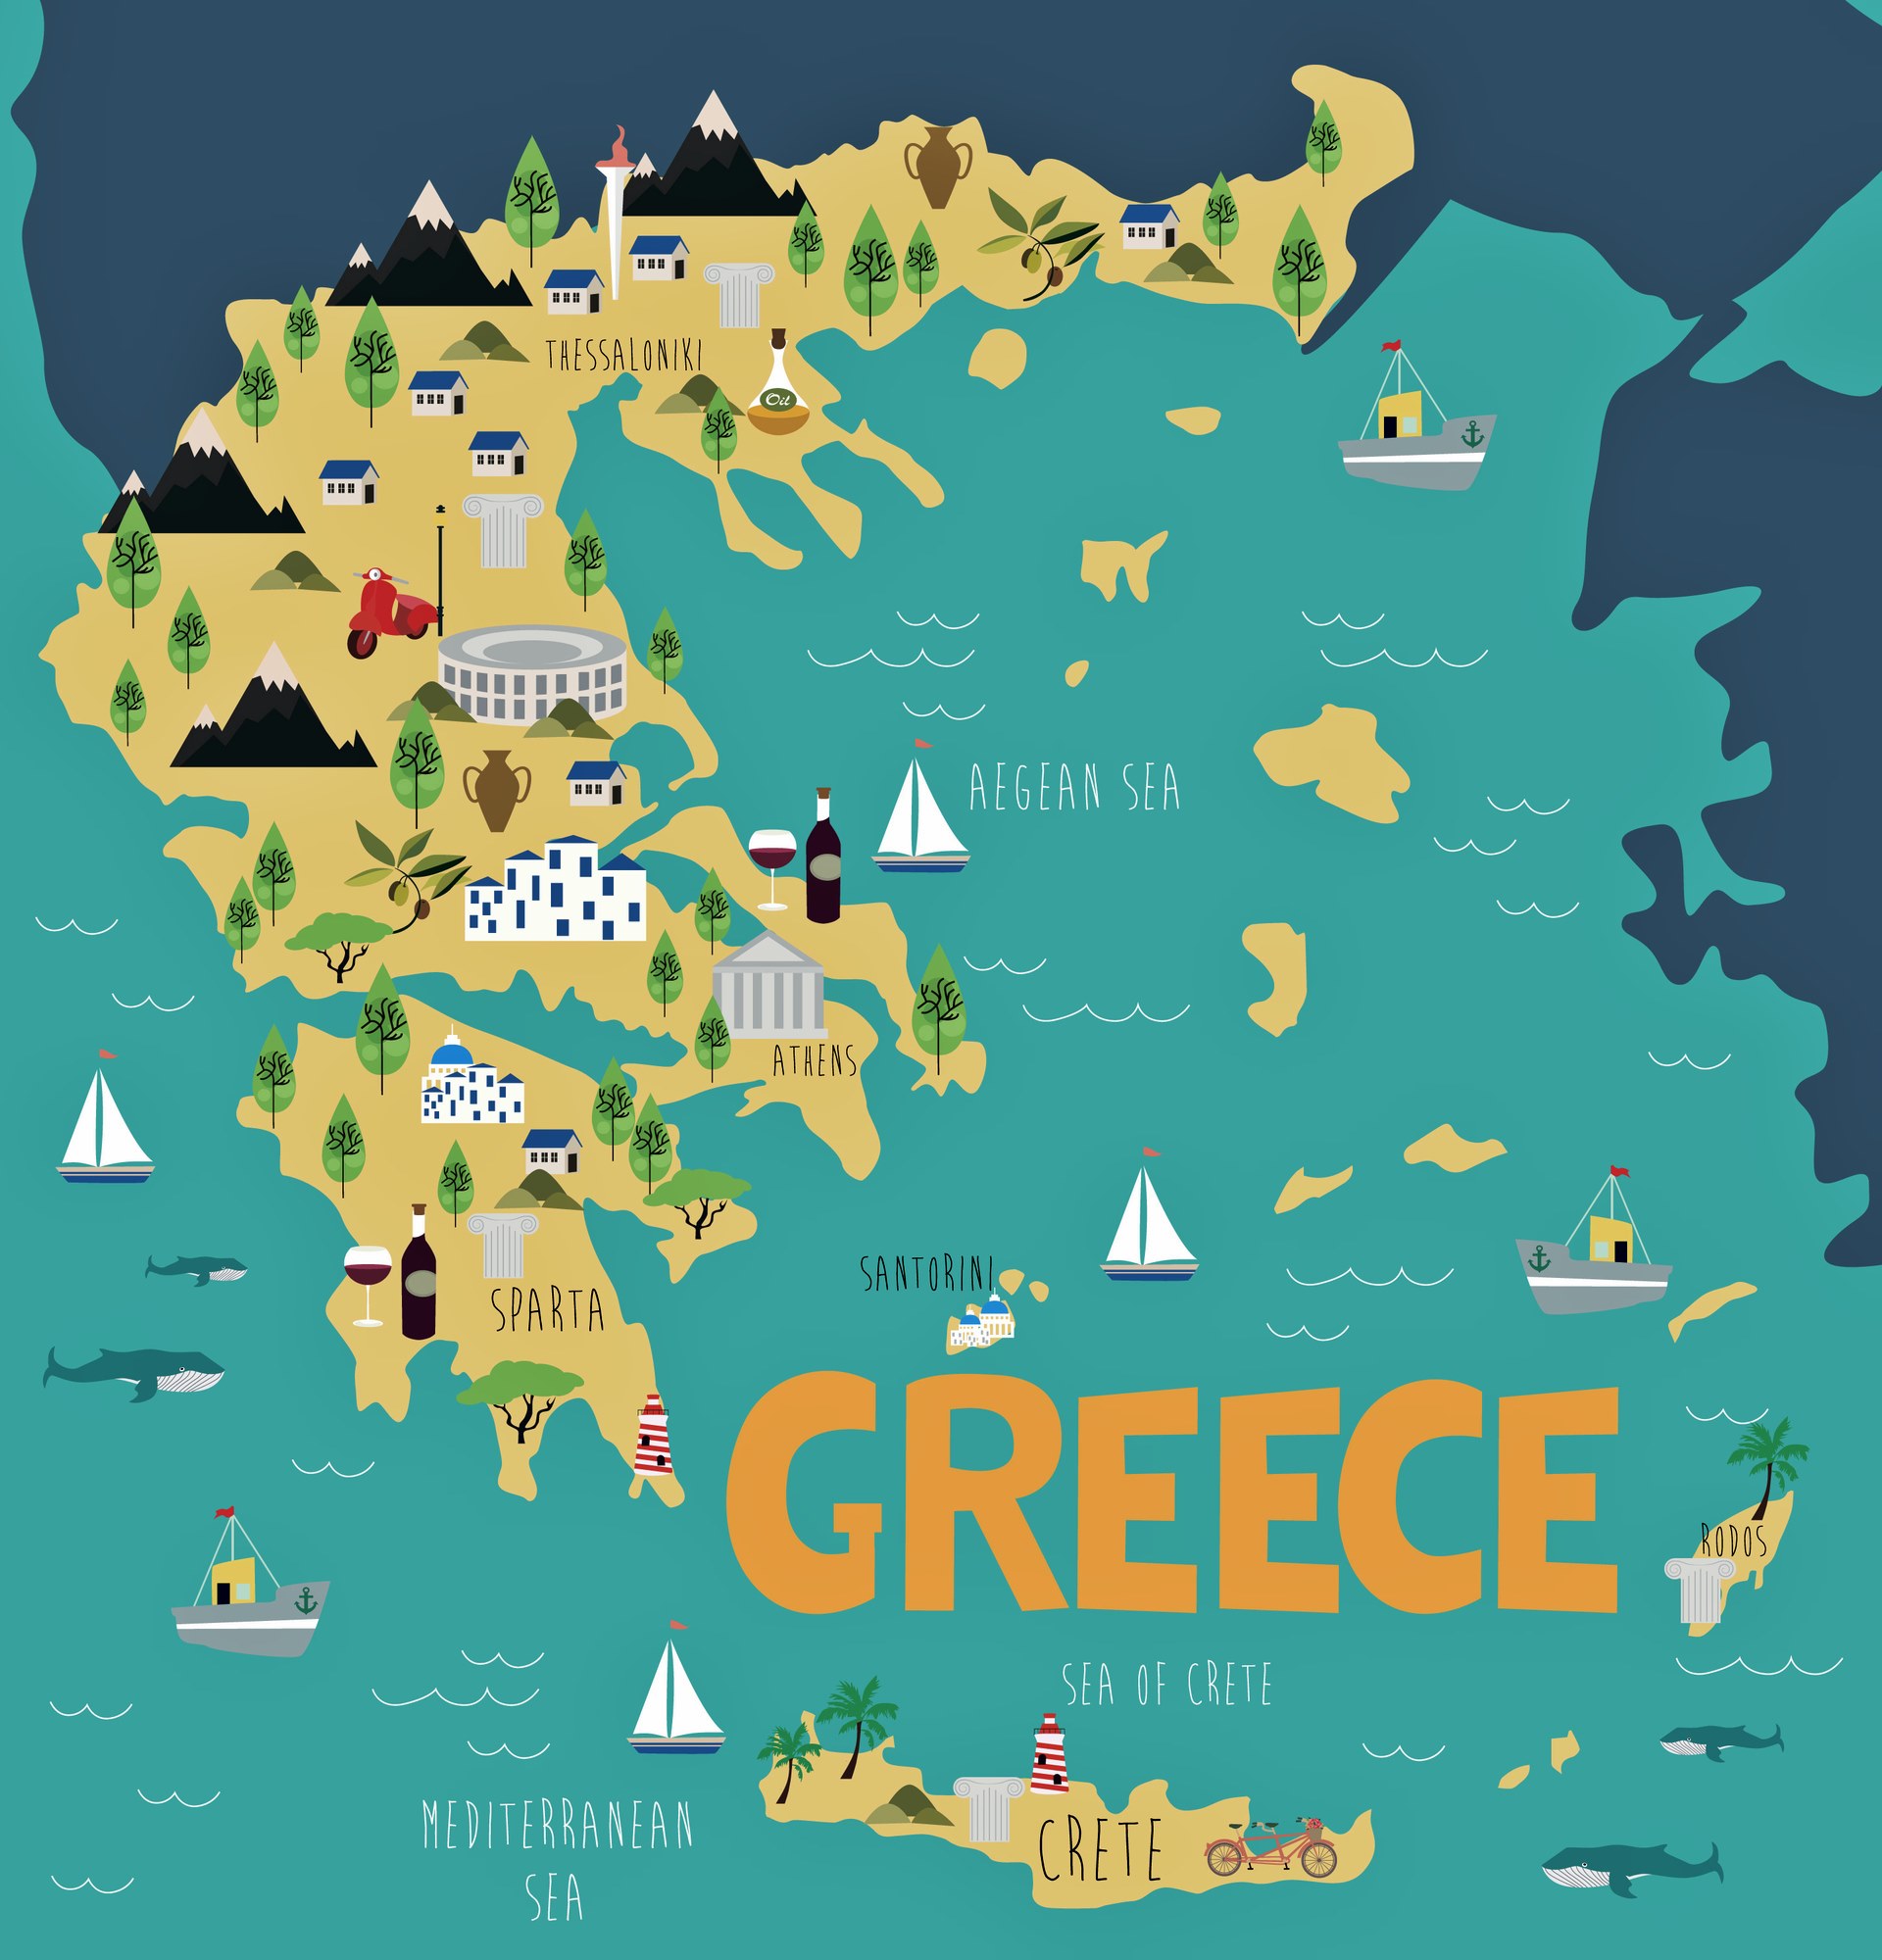 Greece Map of Major Sights and Attractions - OrangeSmile.com